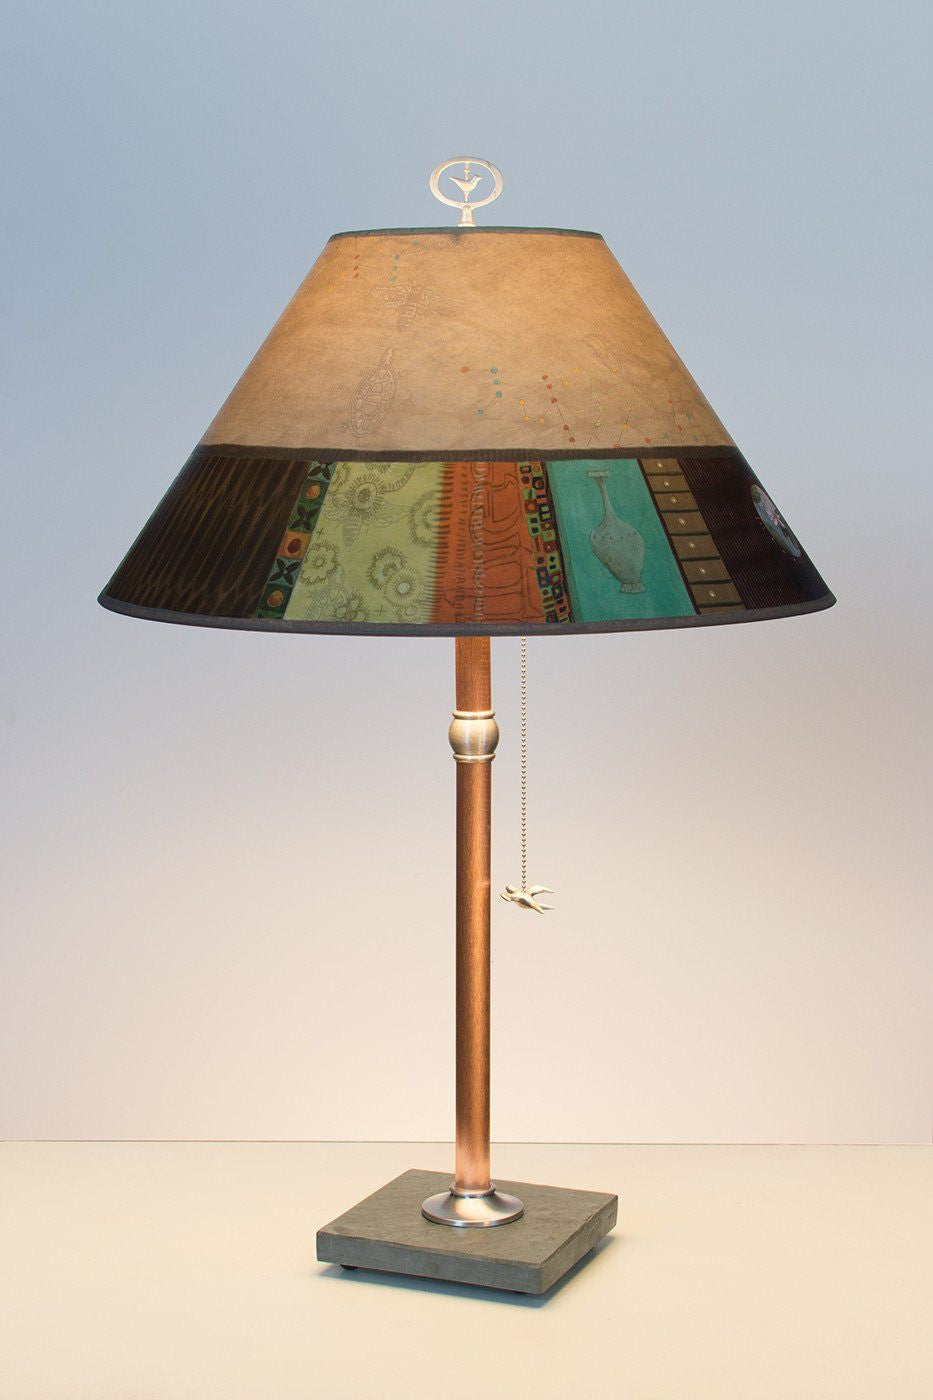 Copper Table Lamp on Vermont Slate with Large Conical Shade in Linen Match